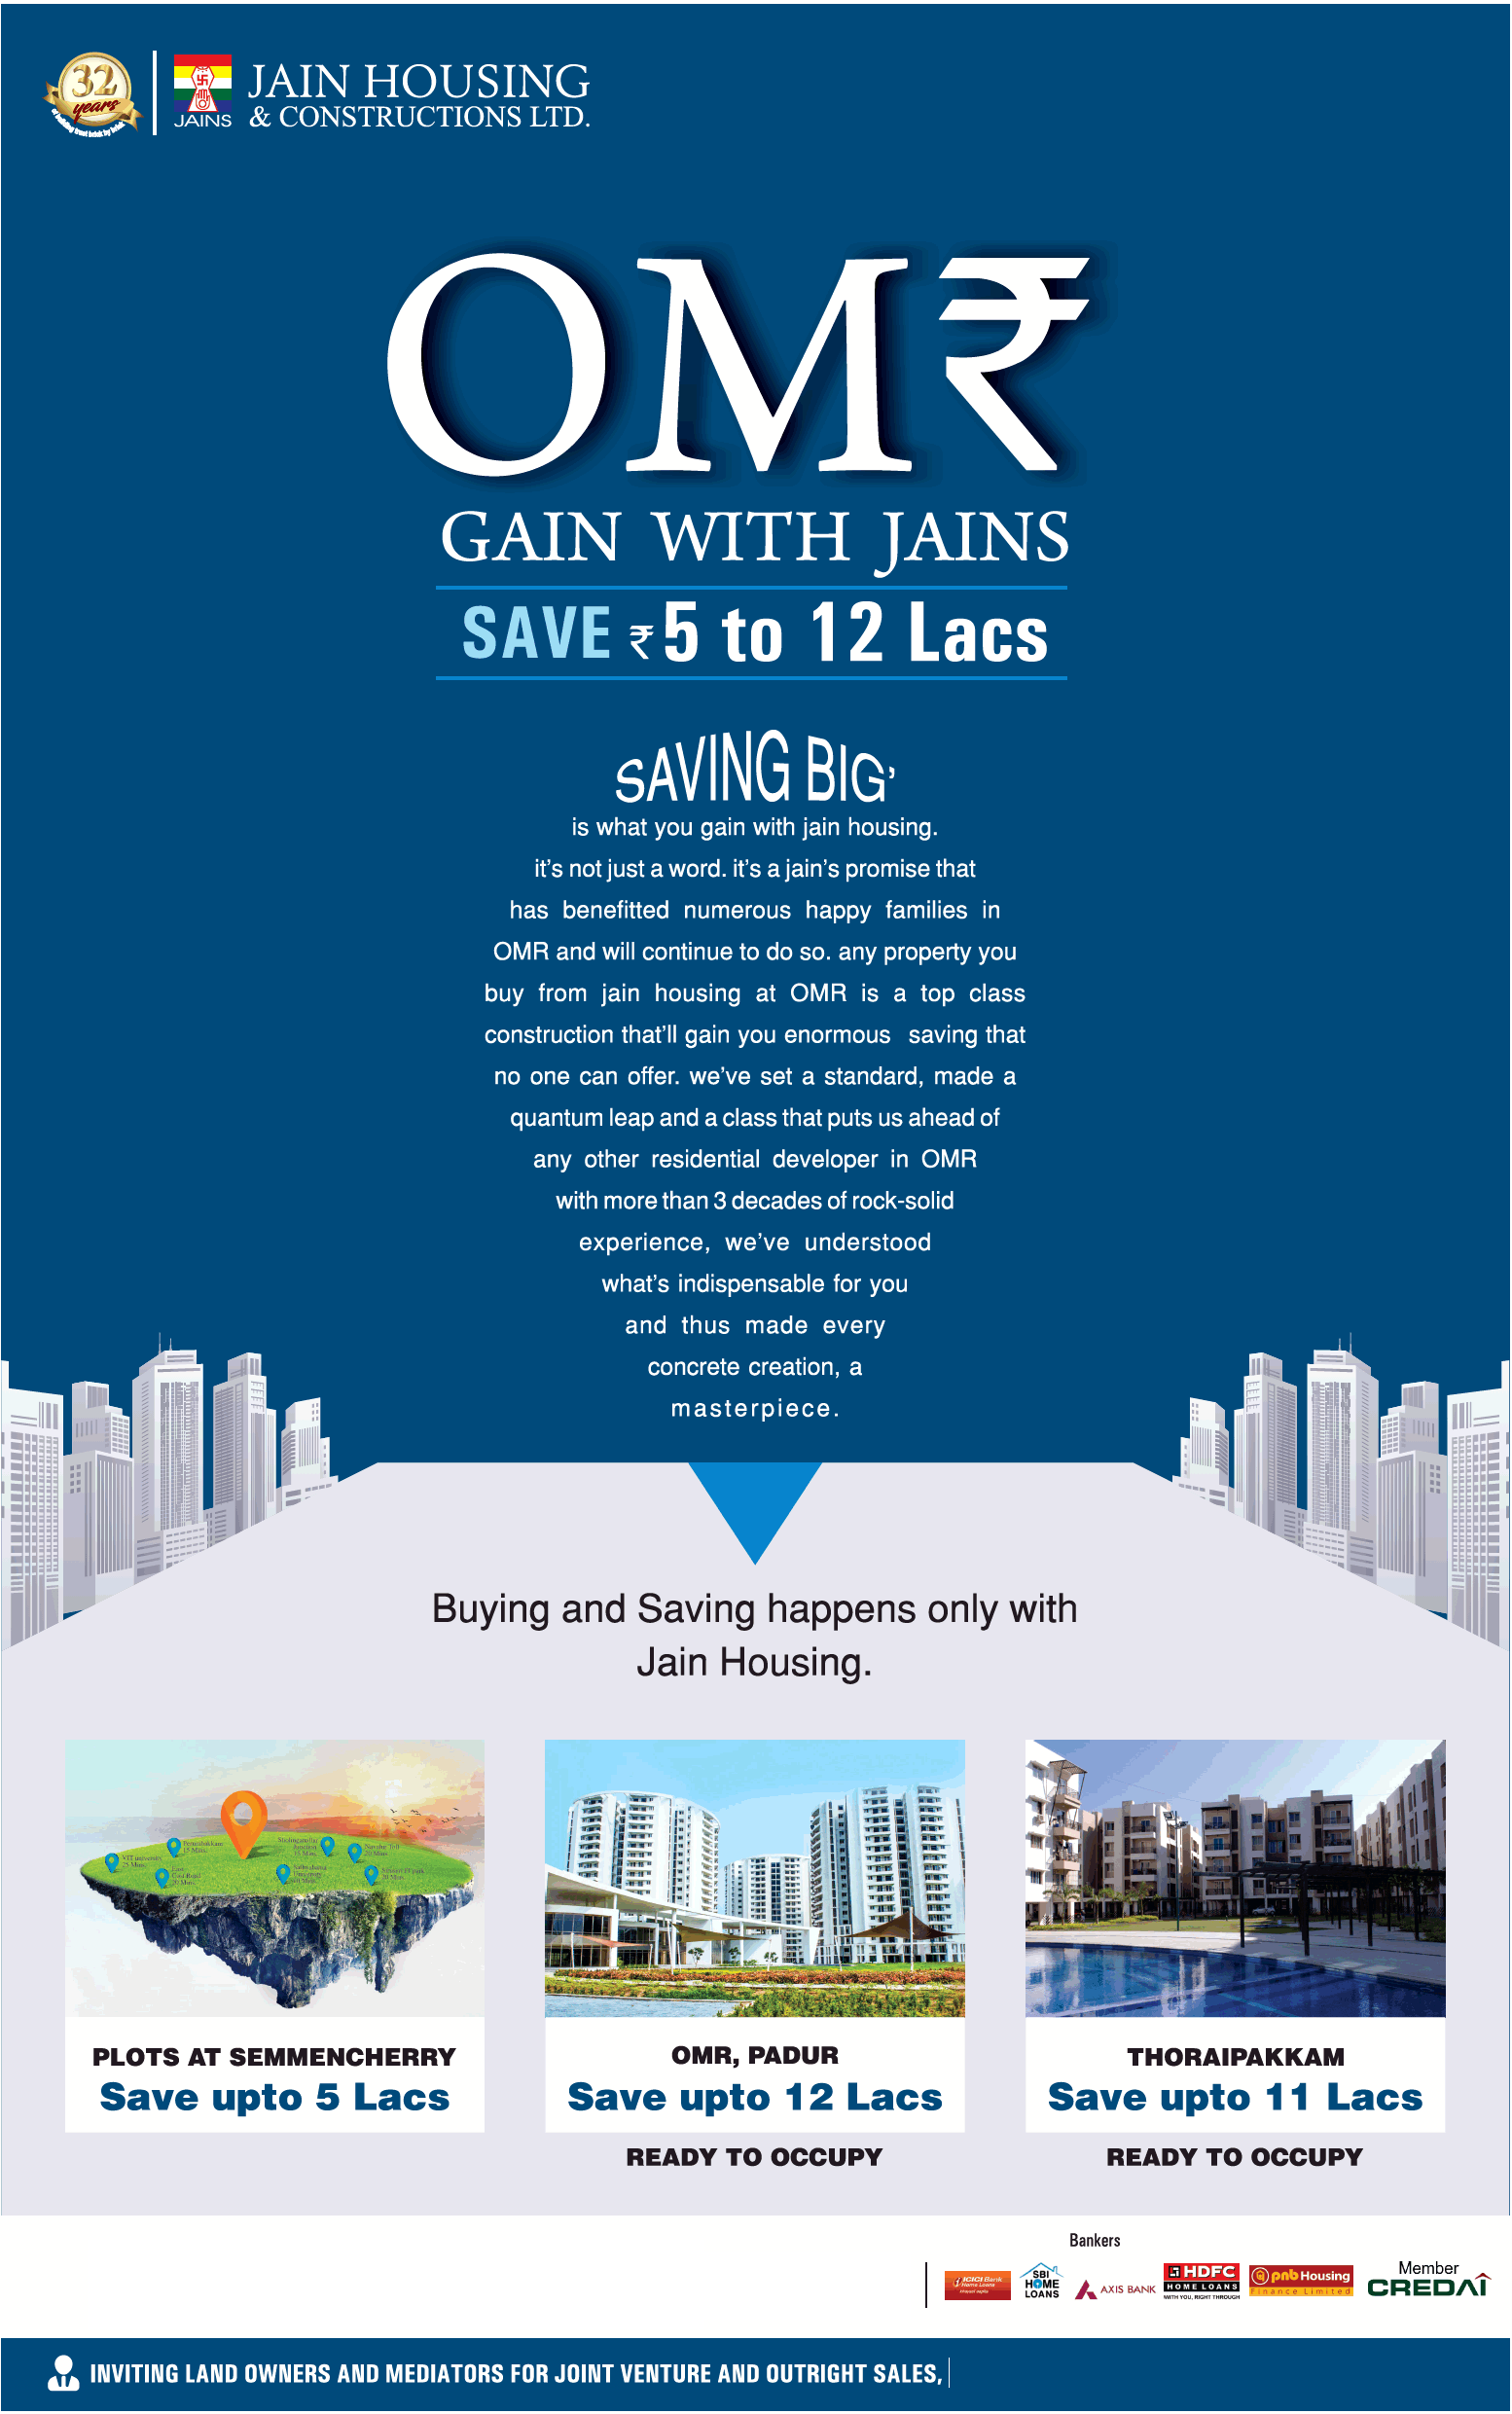 Buying and saving happens only with jain housing in Chennai